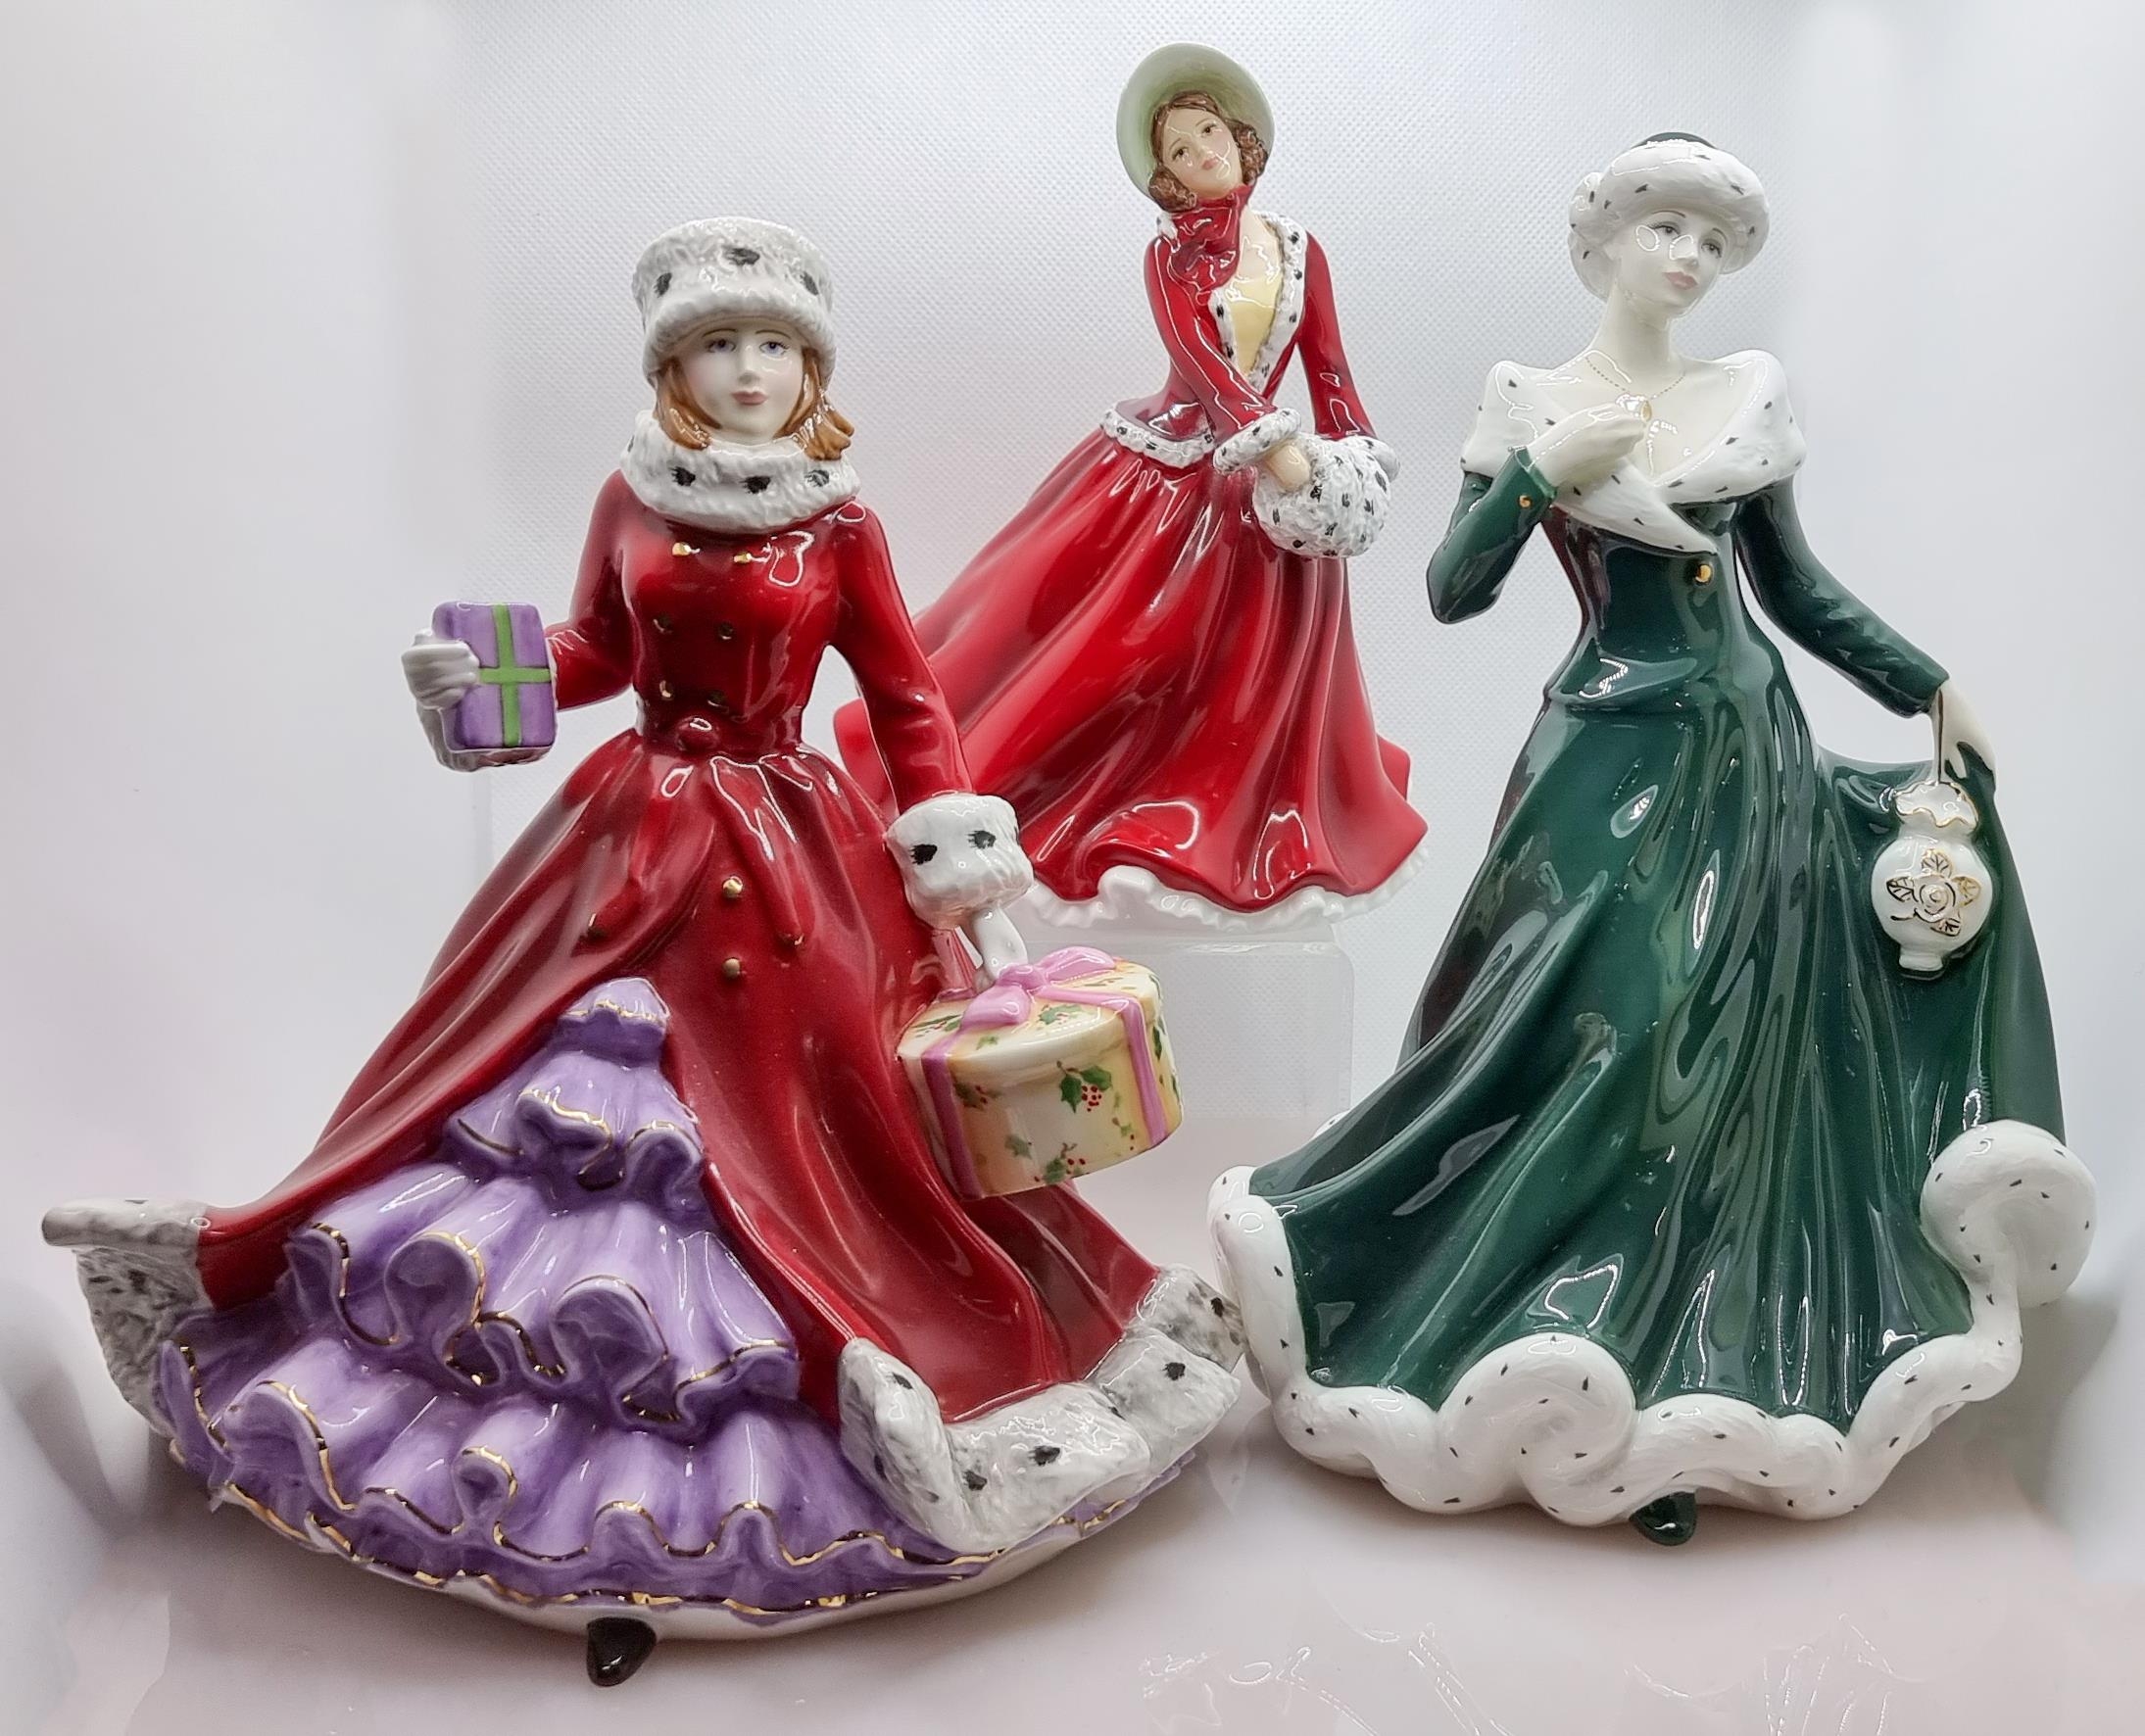 Royal Doulton for Compton Woodhouse Figures Wintertime CW765, Christmas Shopping CW920 both